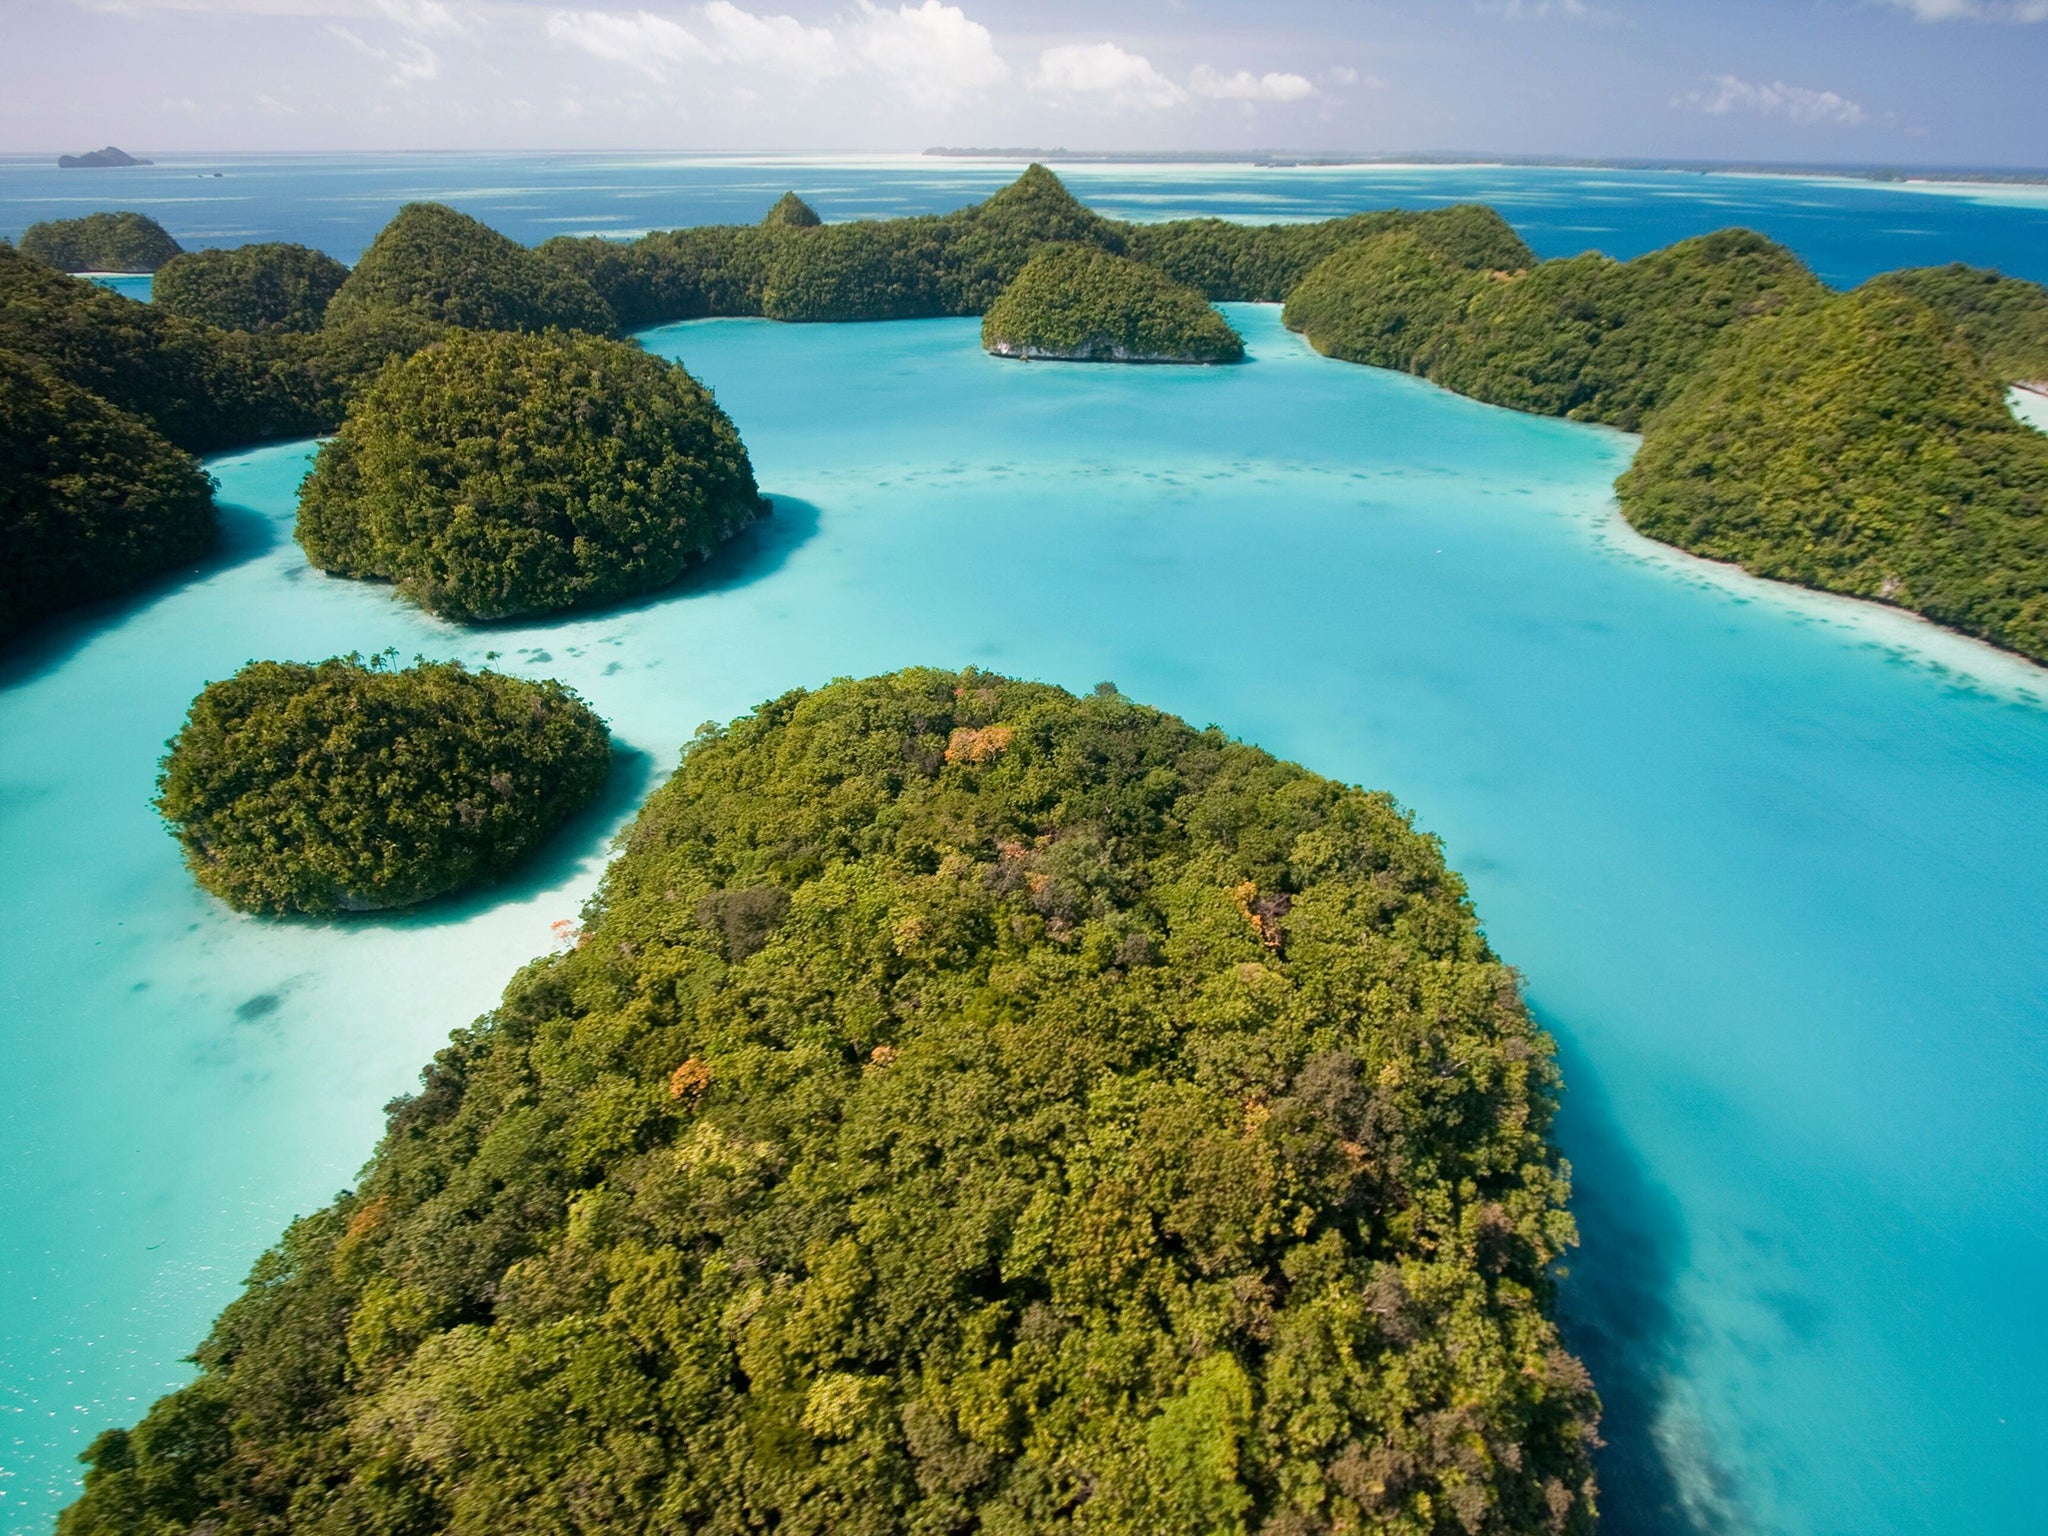 A view of the Palau's Rock Islands as the tiny Pacific island nation of Palau, created one of the world's largest marine sanctuaries, saying it wanted to restore the ocean for future generations. At 500,000 square kilometers (193,000 square miles), the sanctuary is the same size as Spain and covers an underwater wonderland containing 1,300 species of fish and 700 types of coral